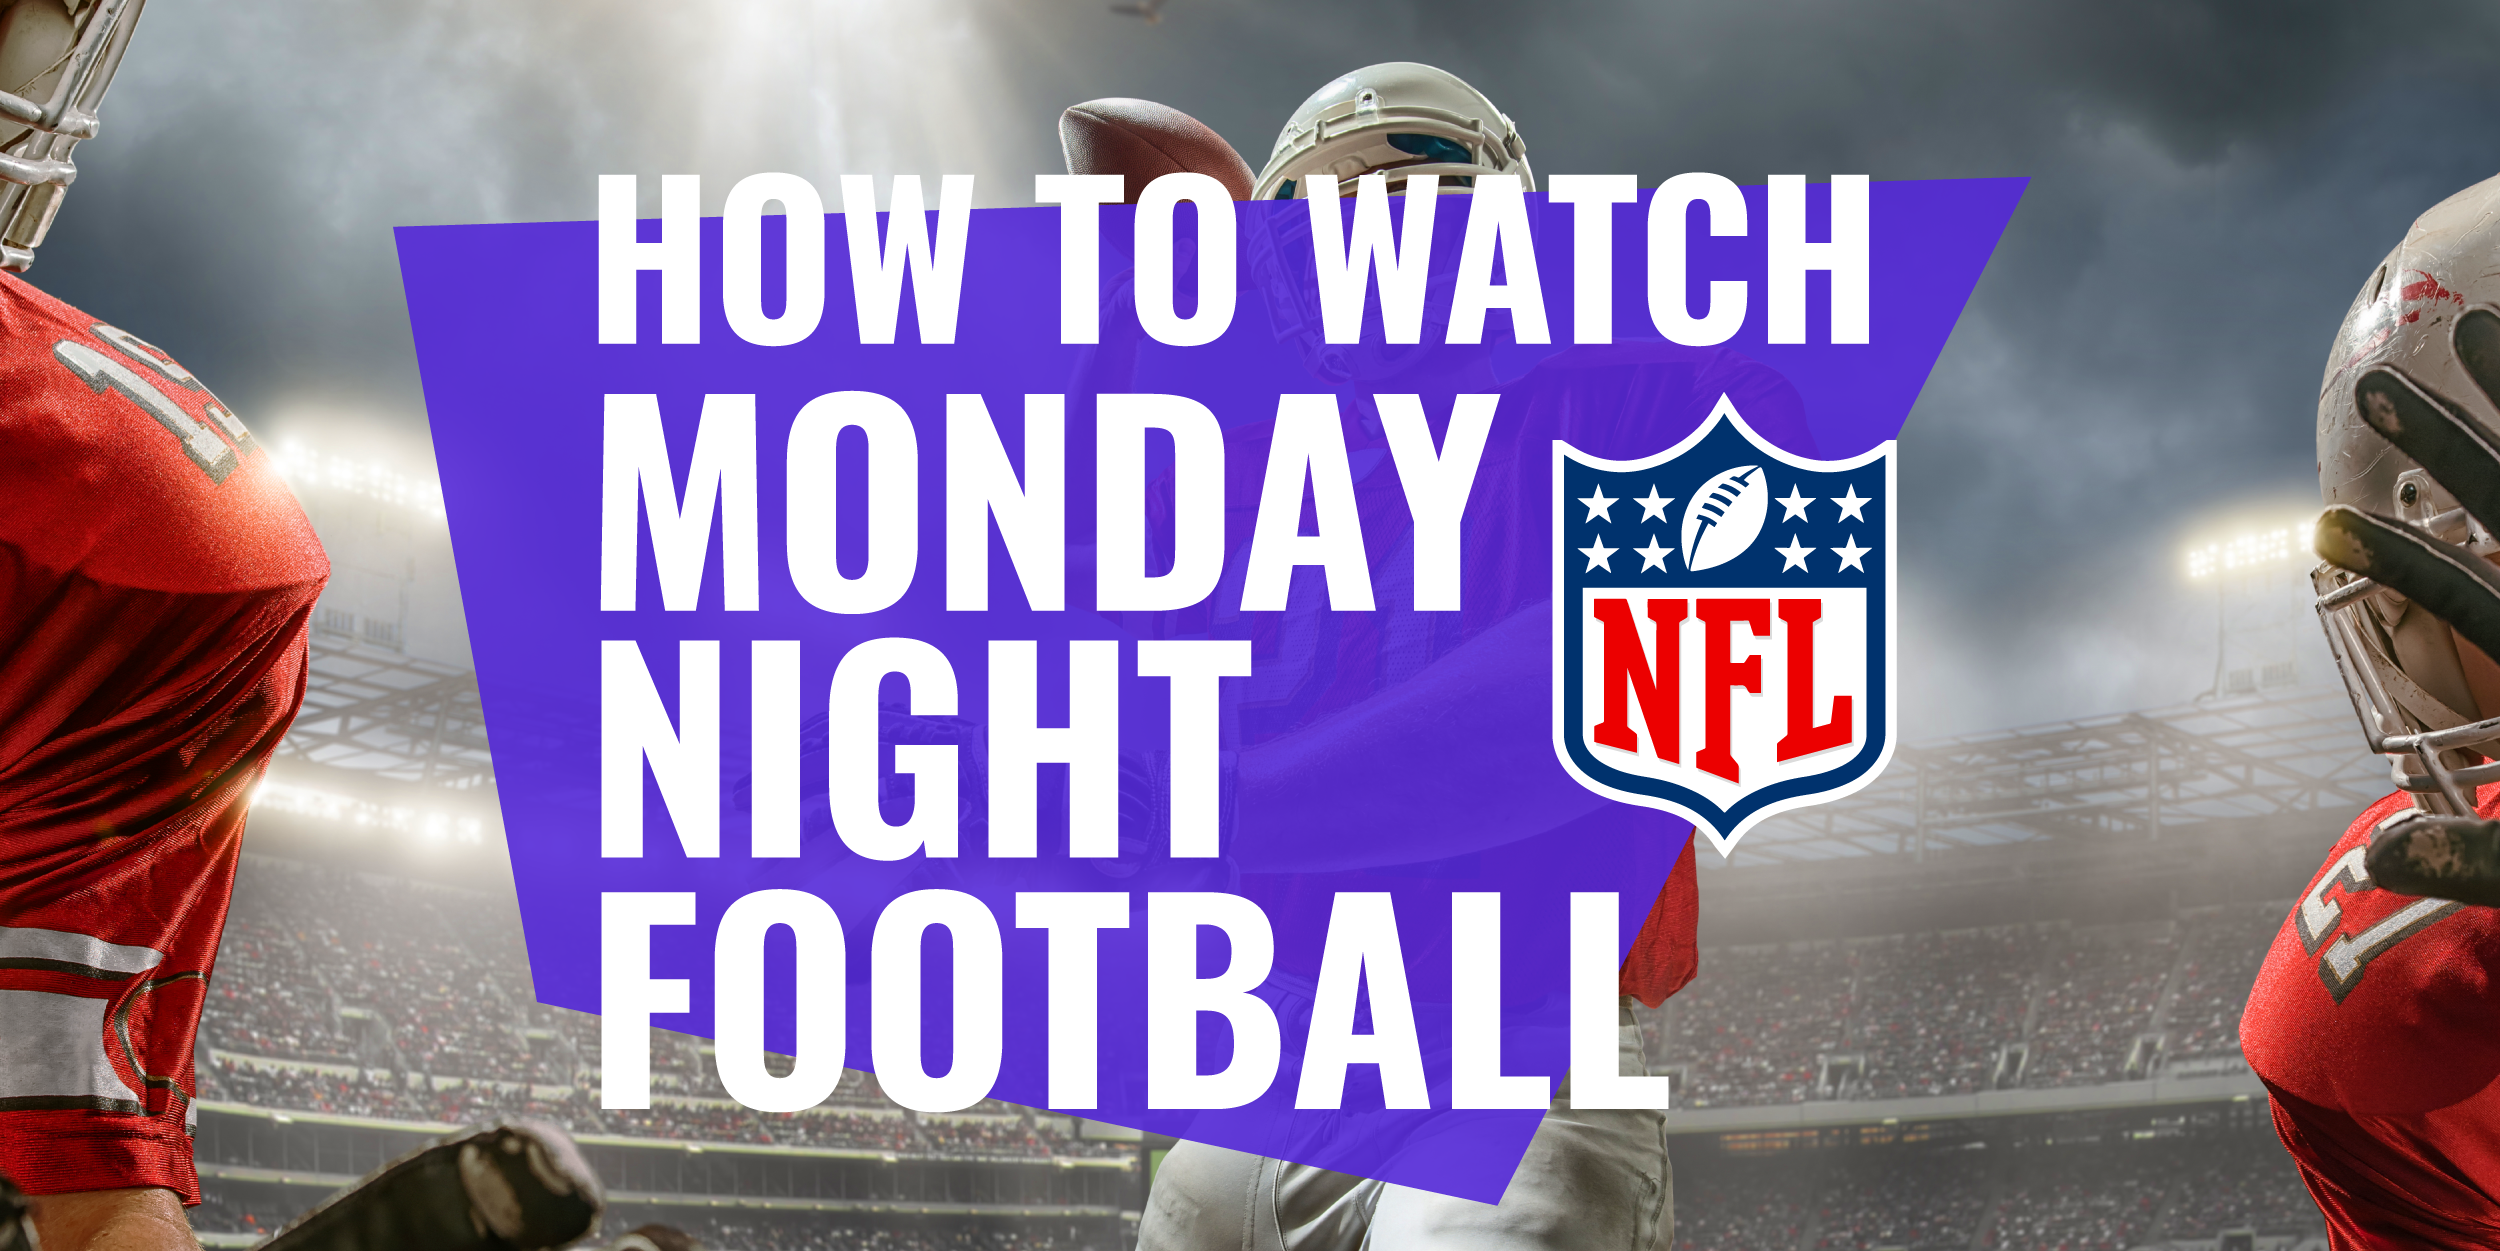 where is tonight's monday night football game